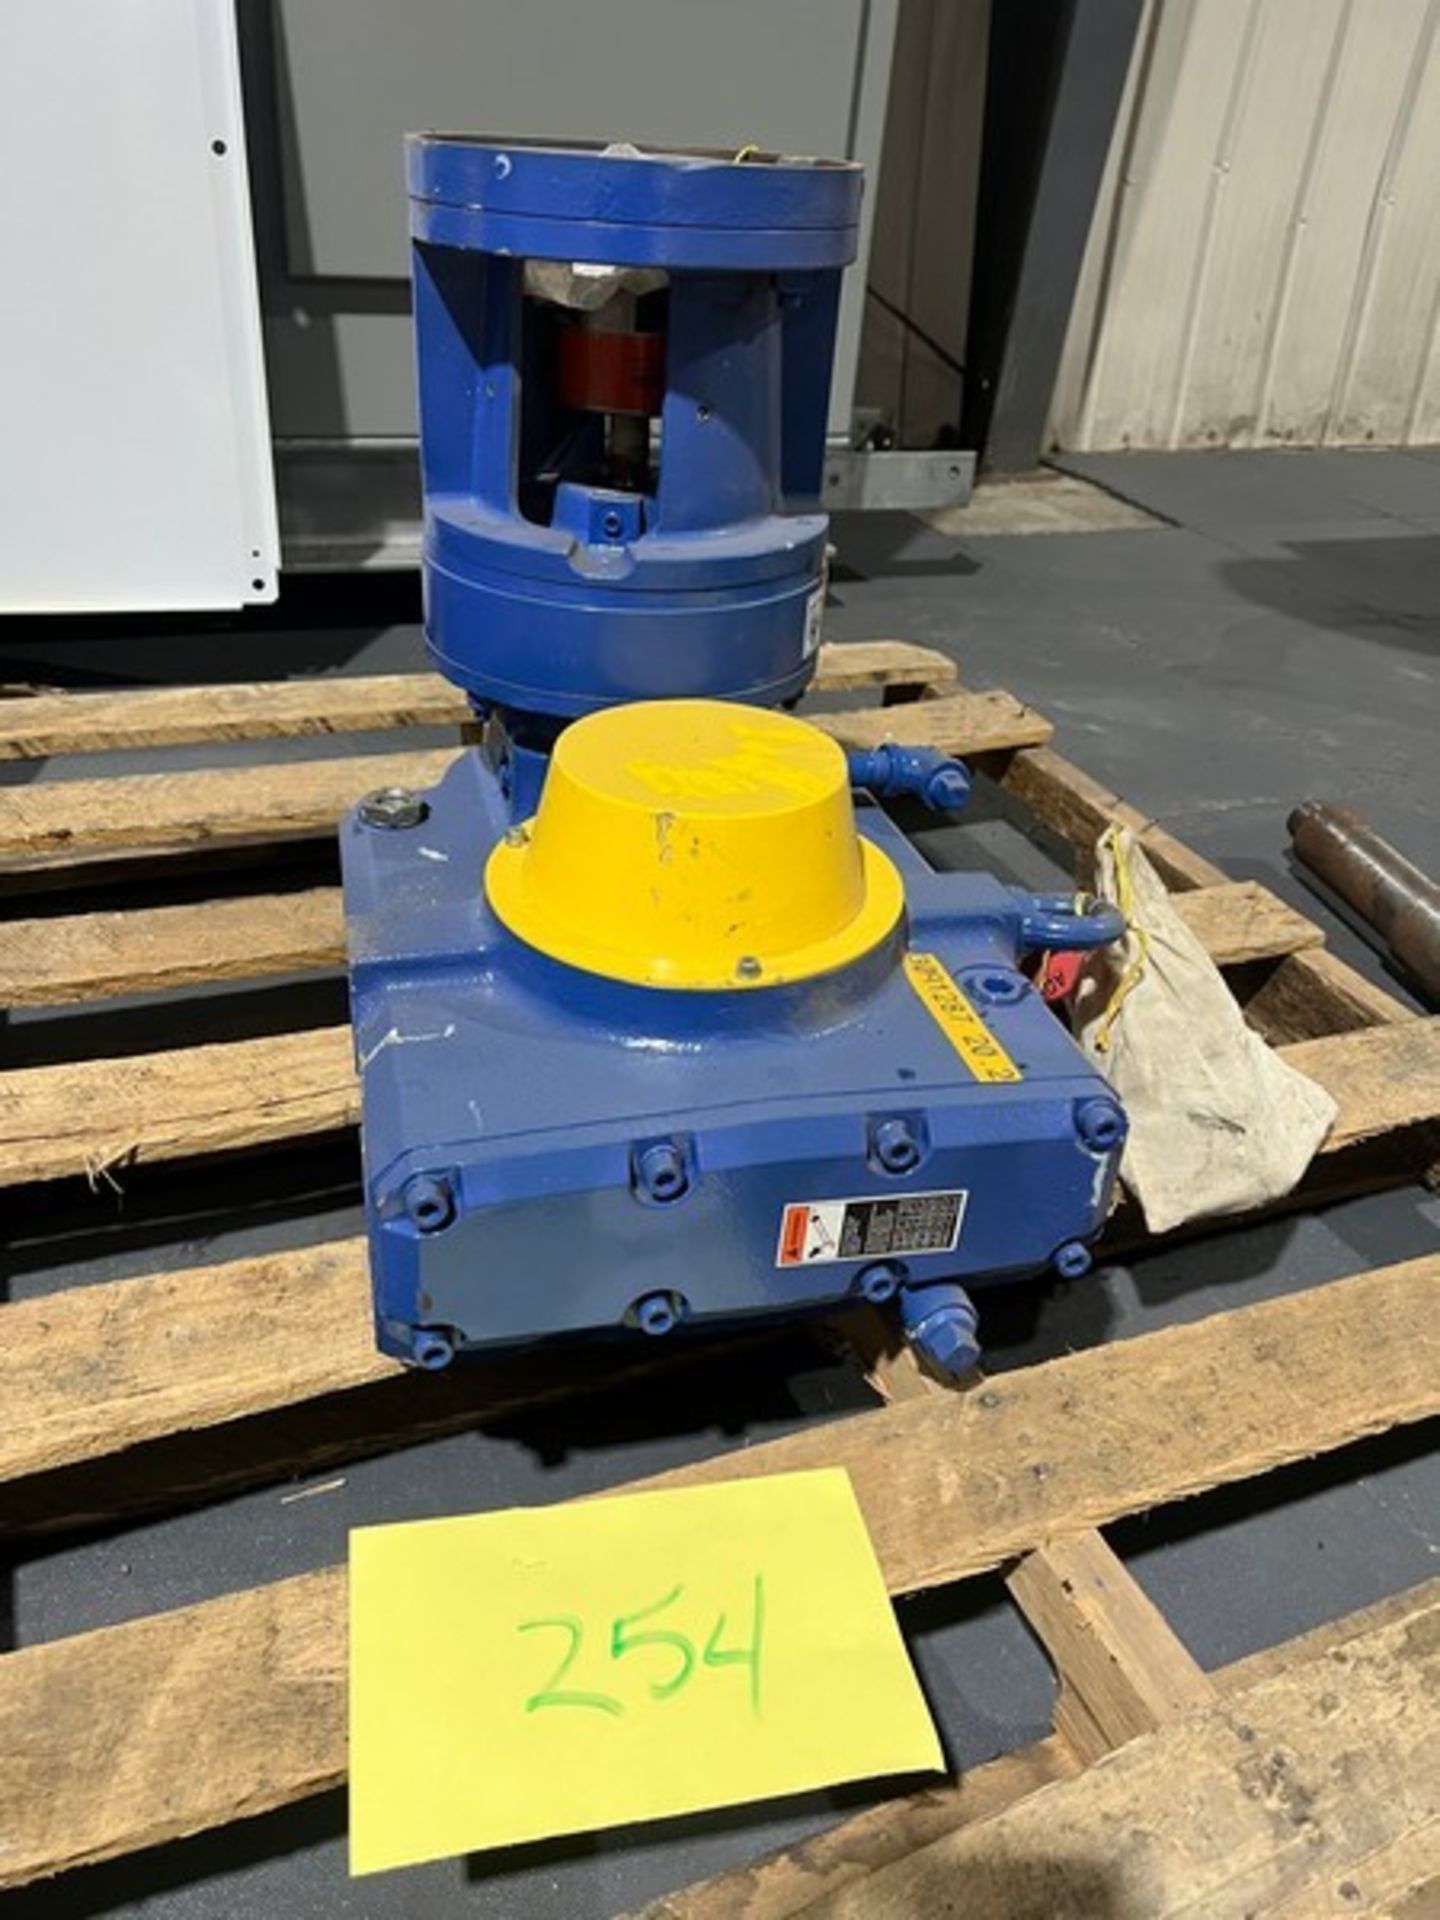 Sumitomo Gear Reducer (2019) (RIGGING INCLUDED WITH SALE PRICE) --Loading Fee $45.00***EUSA***